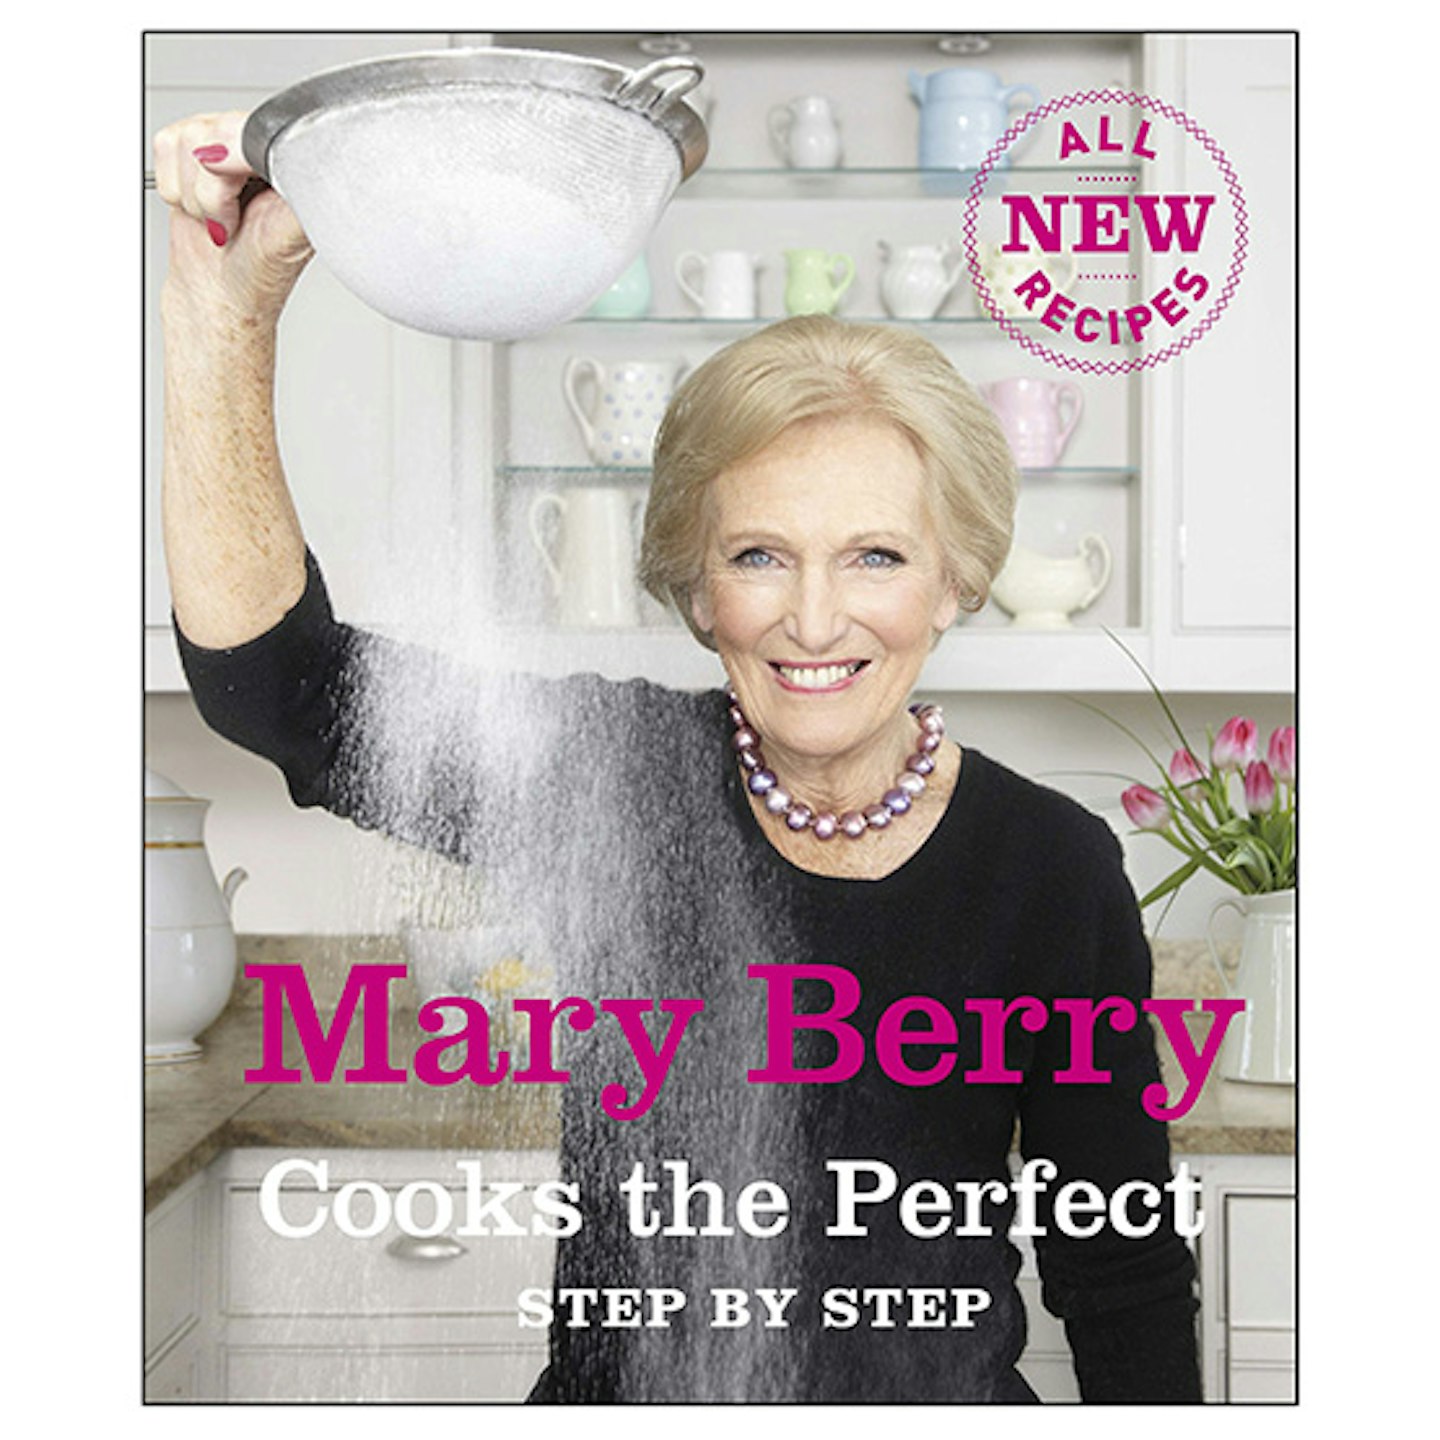 mary berry cooks the perfect book